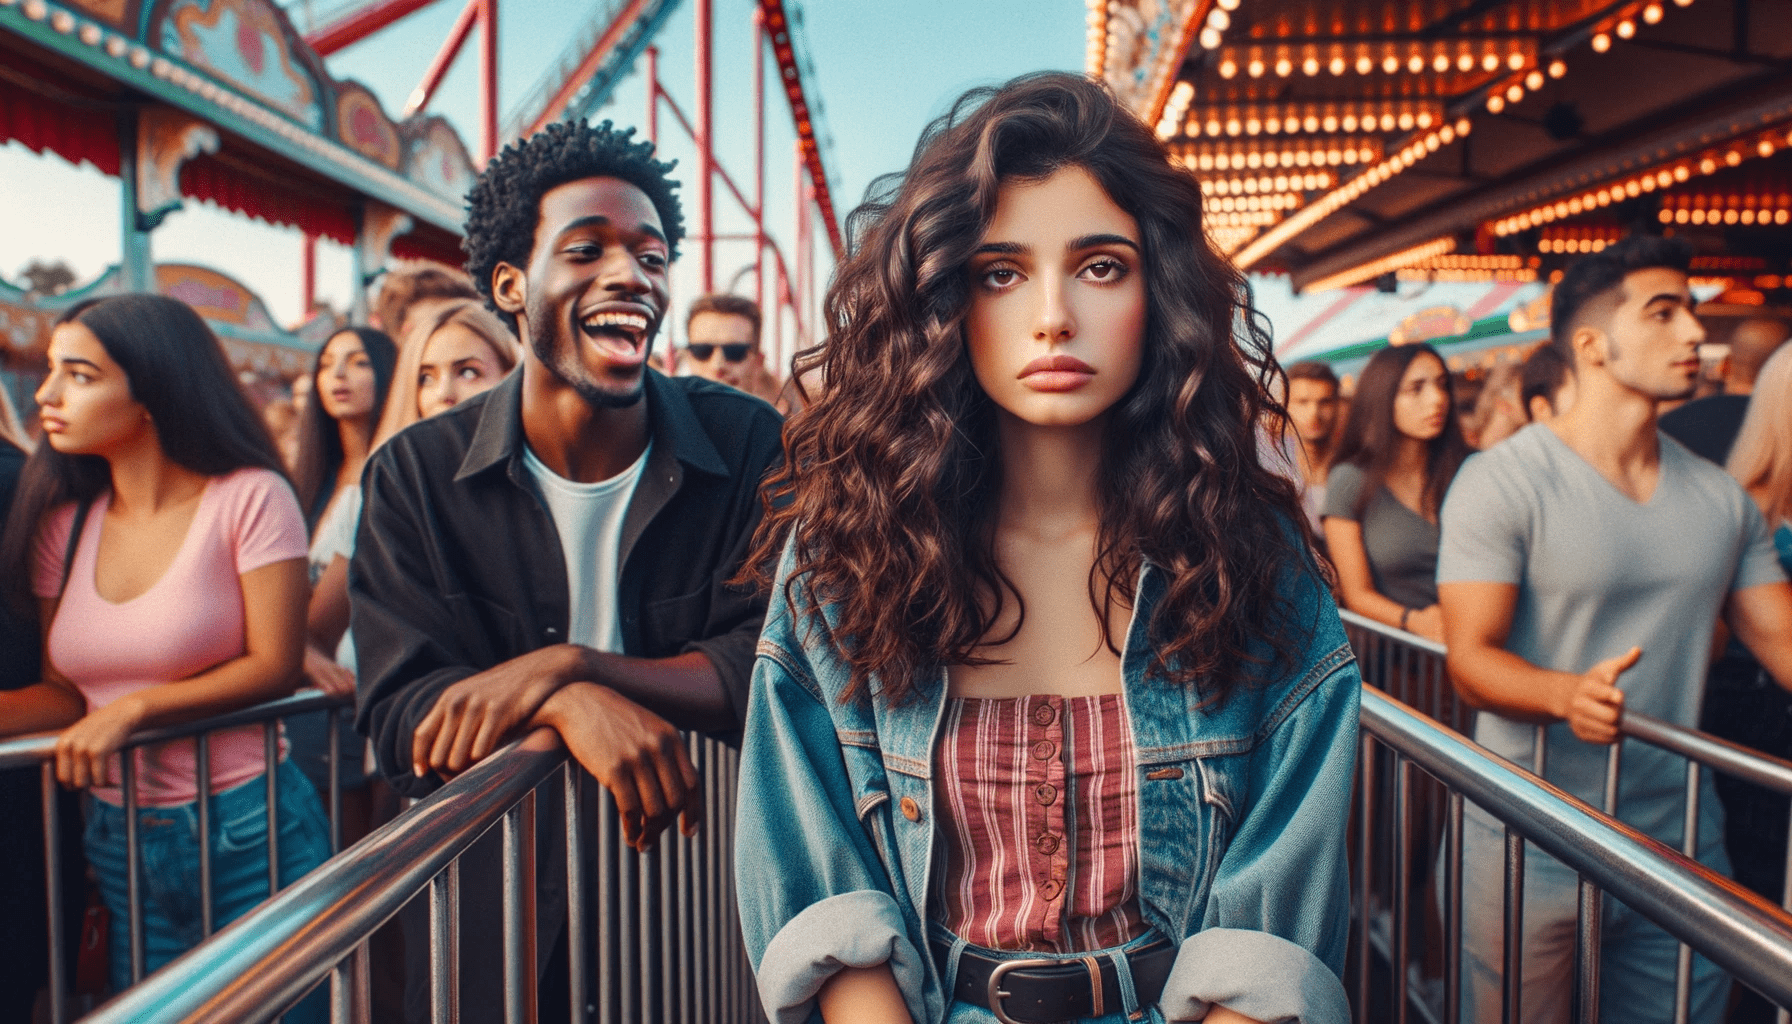 moment at an amusement park where a young Middle Eastern woman with long dark curly hair looks bored and disintere